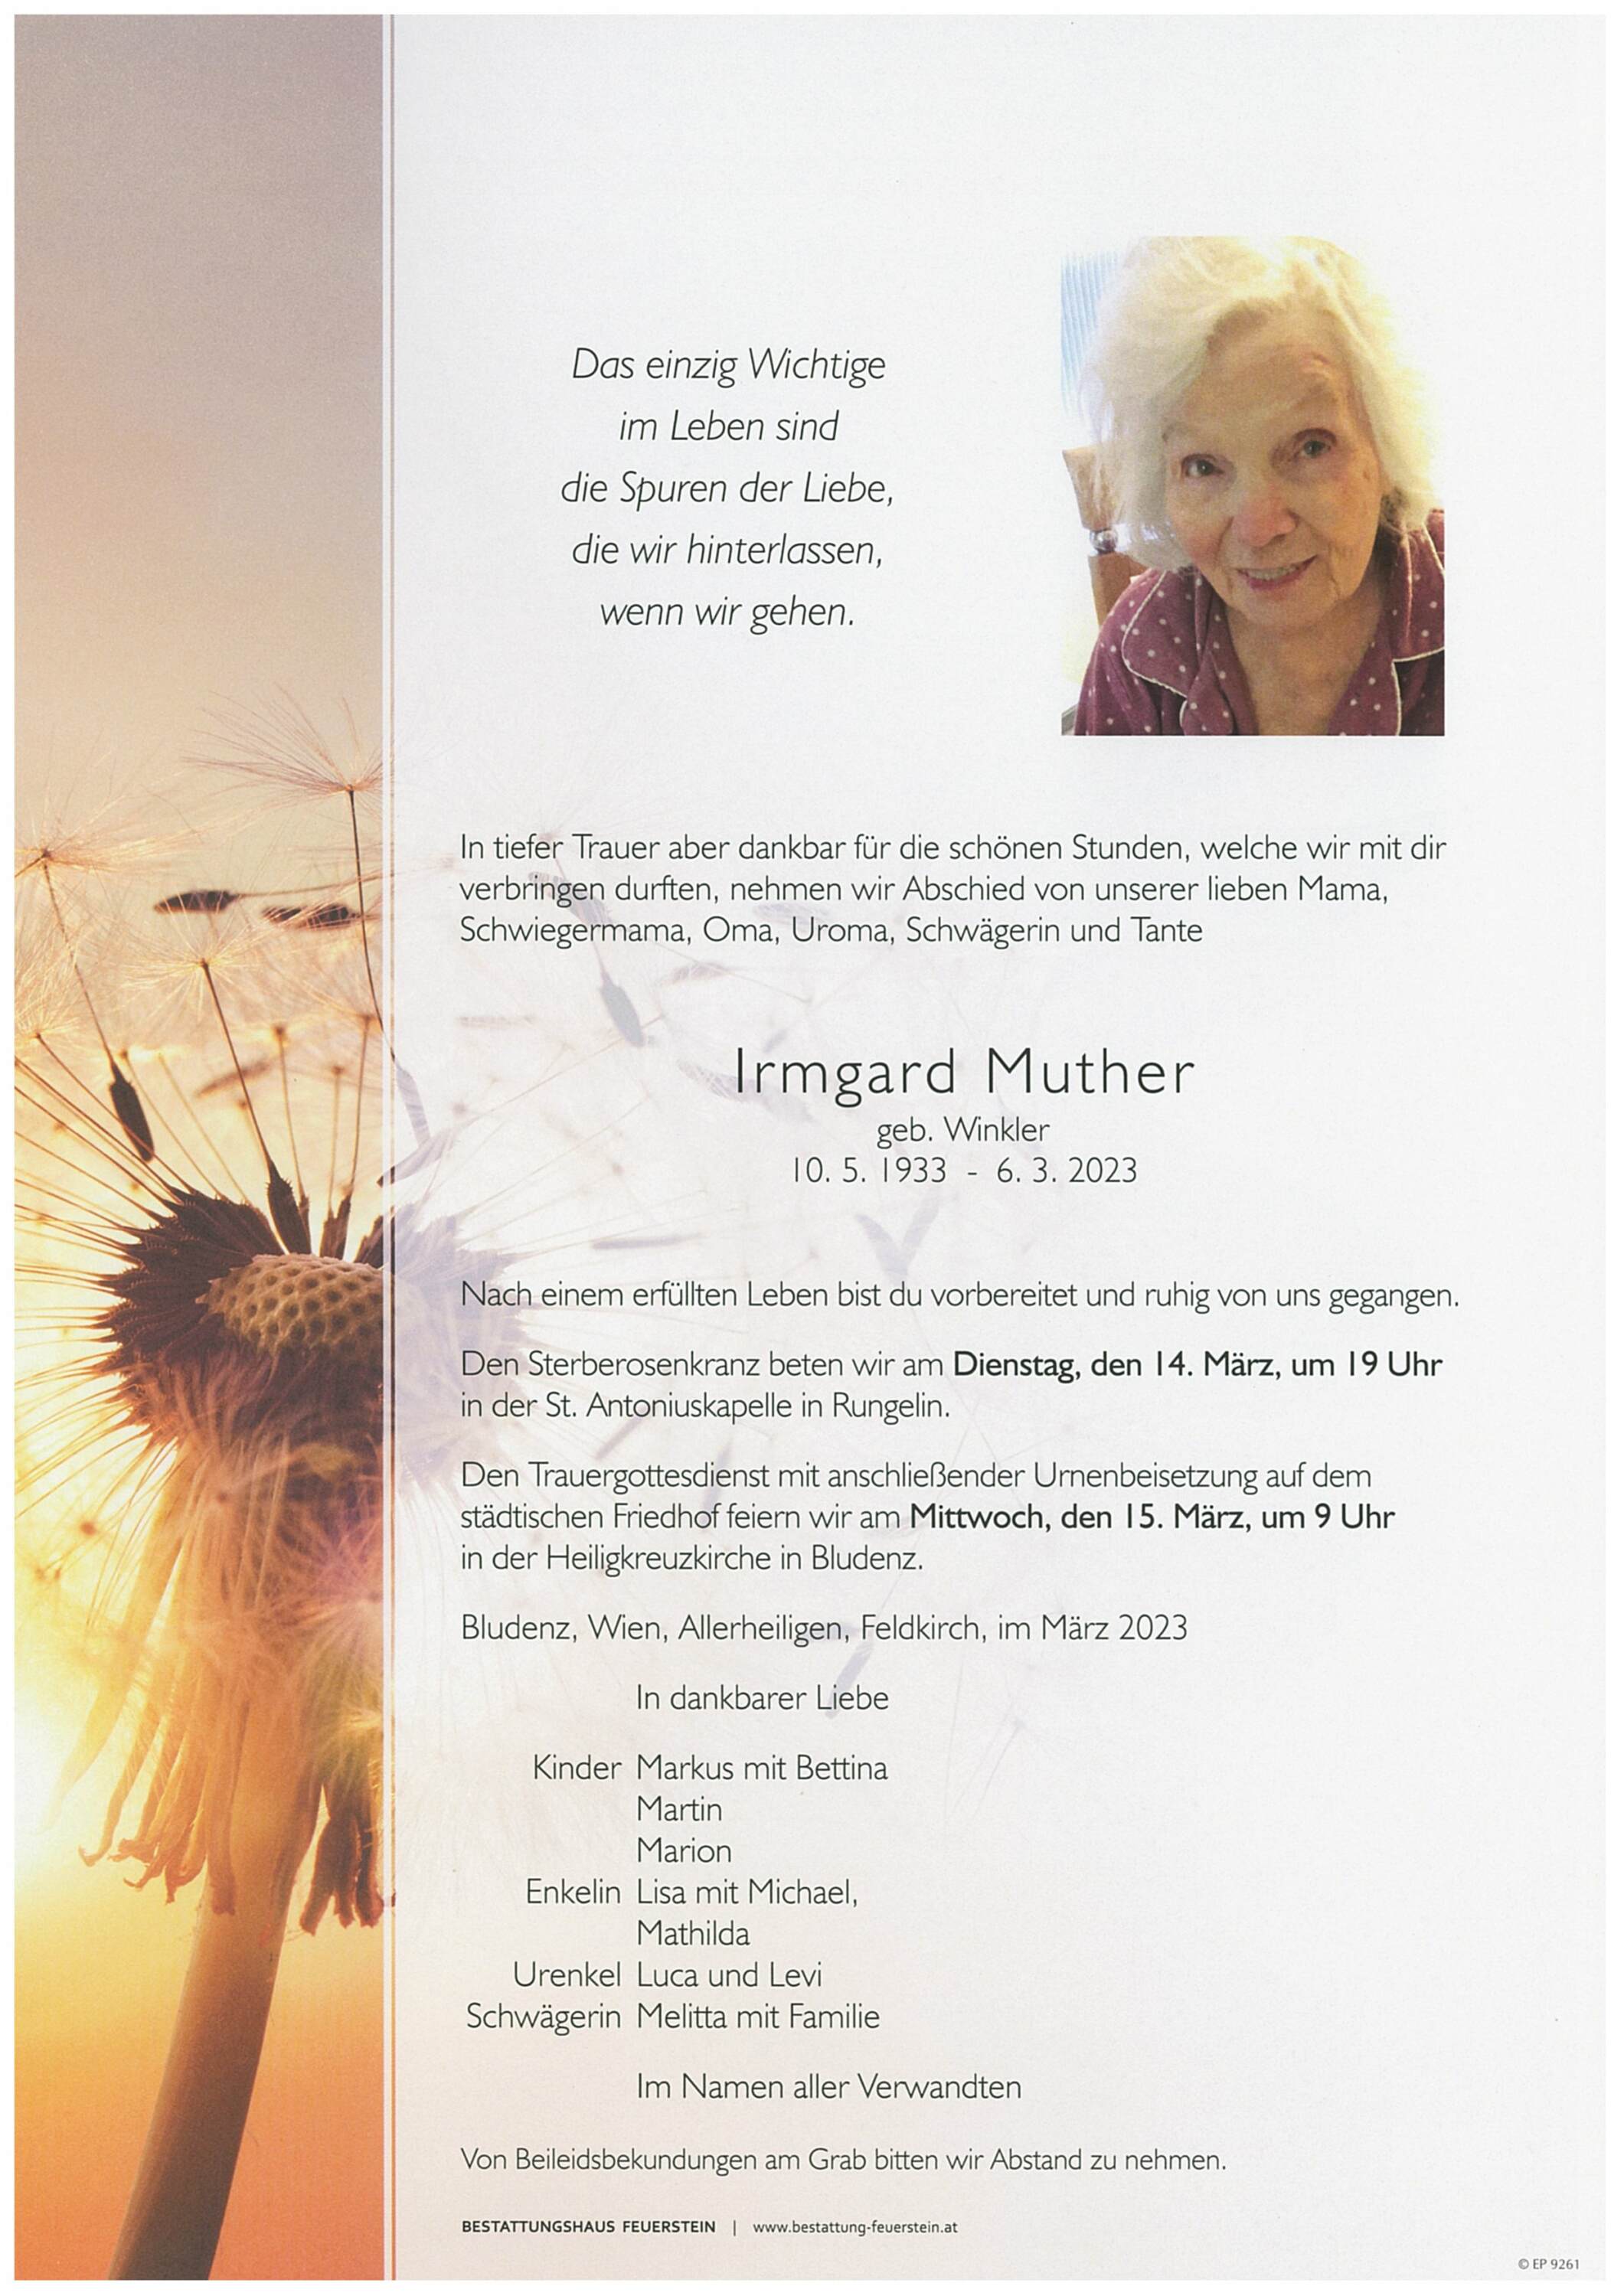 Irmgard Muther